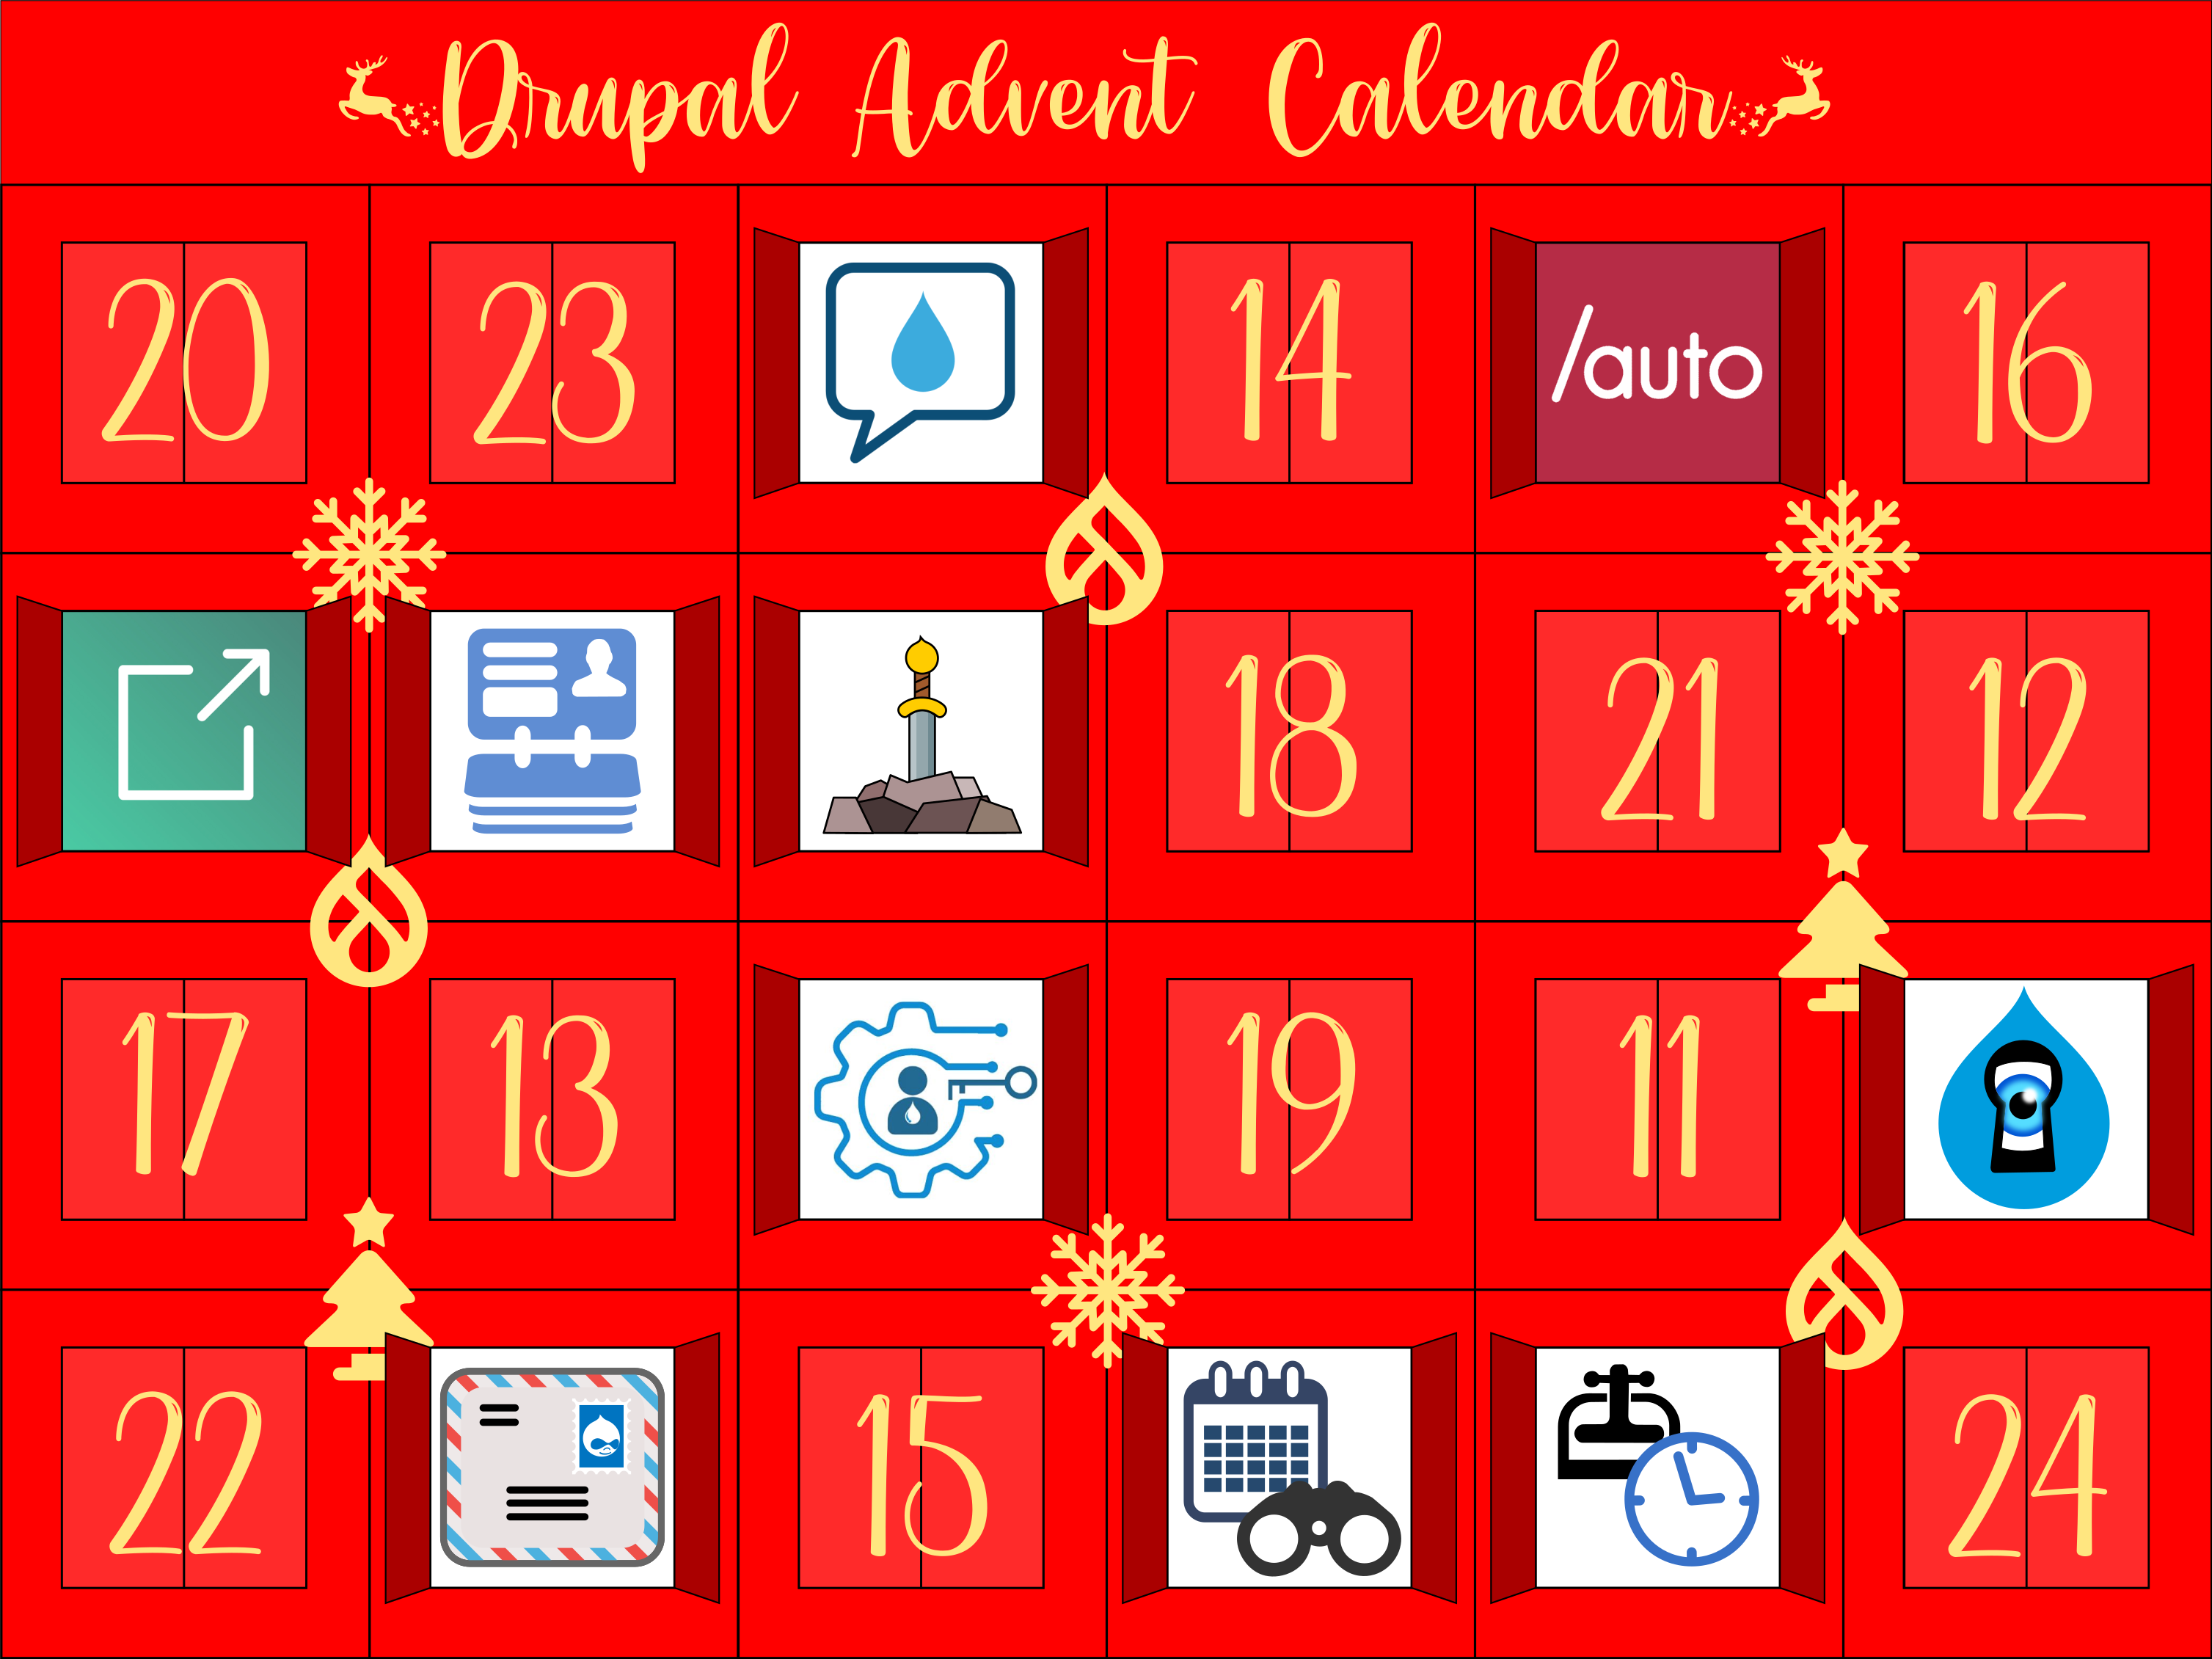 Advent Calendar with door 10 open containing the Contact Storage module